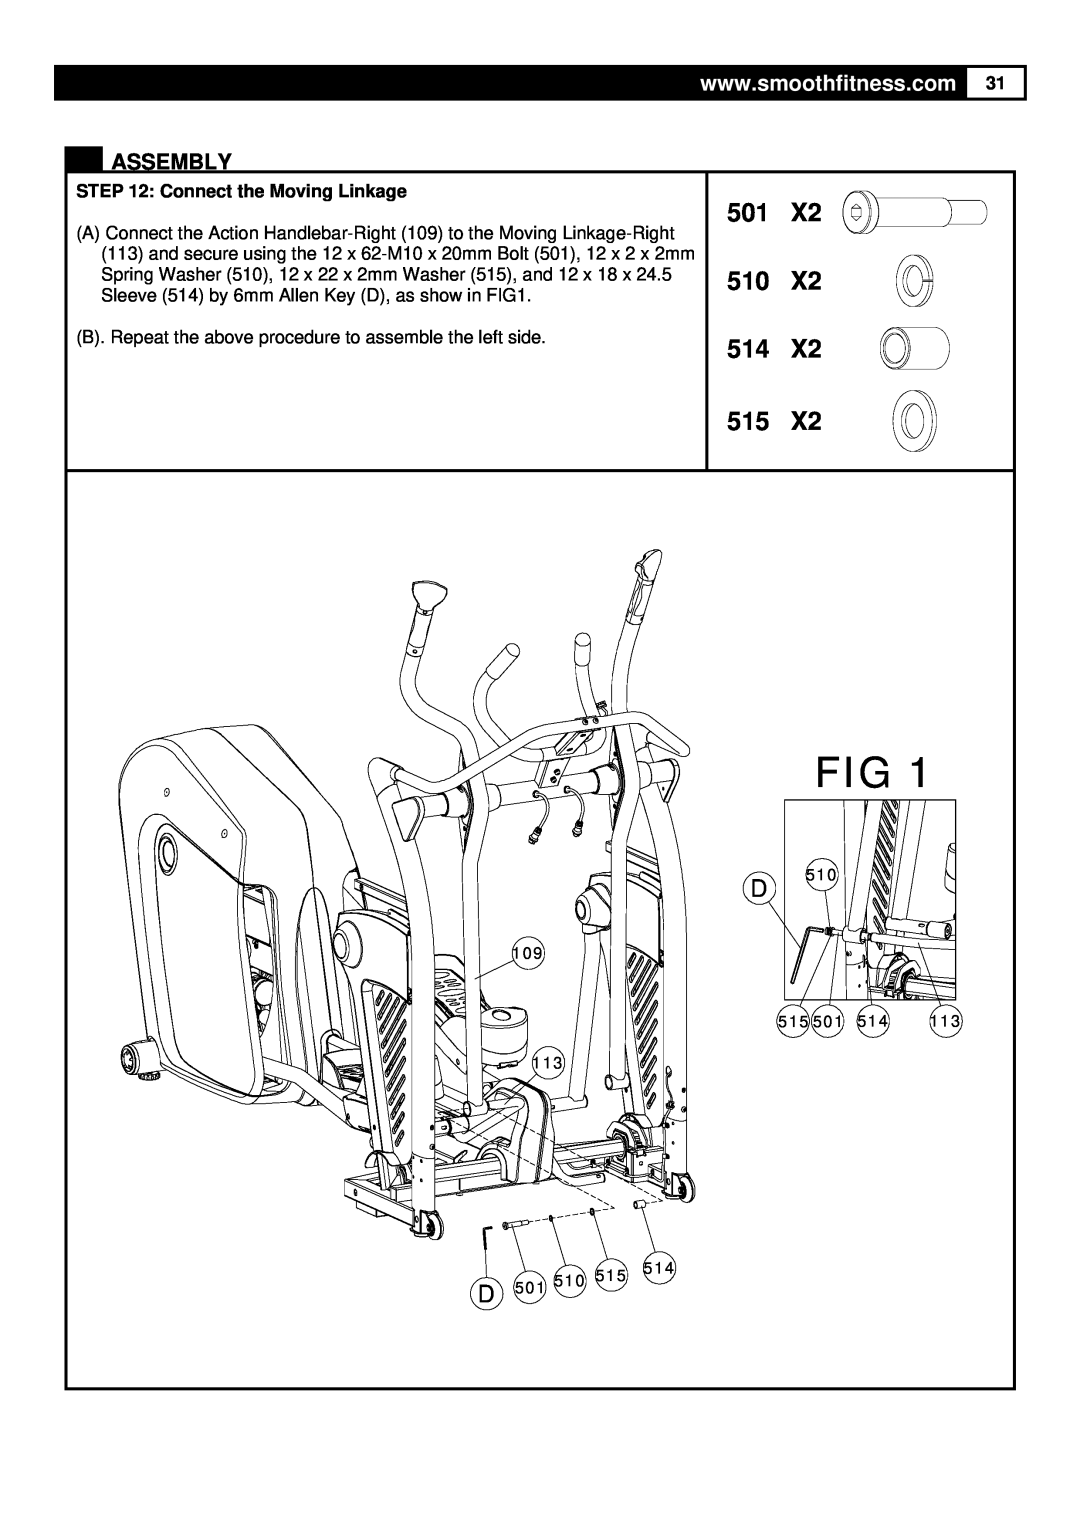 Smooth Fitness 9.25X user manual 501 510 514 515, Assembly, Connect the Moving Linkage, 109 113 D 501 510 515 